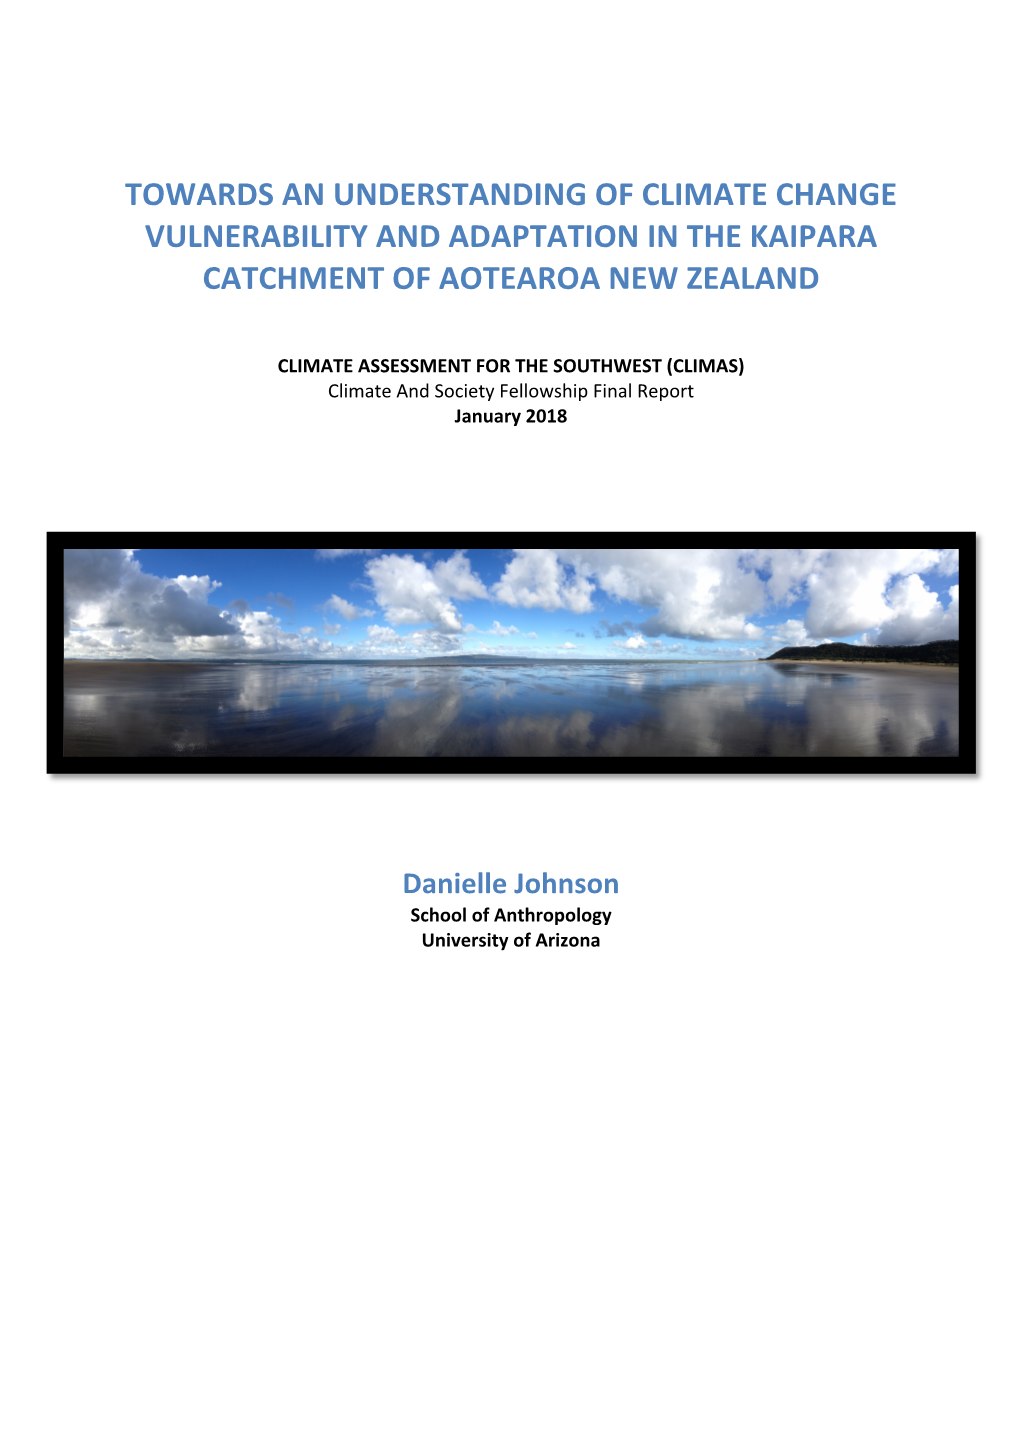 Towards an Understanding of Climate Change Vulnerability and Adaptation in the Kaipara Catchment of Aotearoa New Zealand